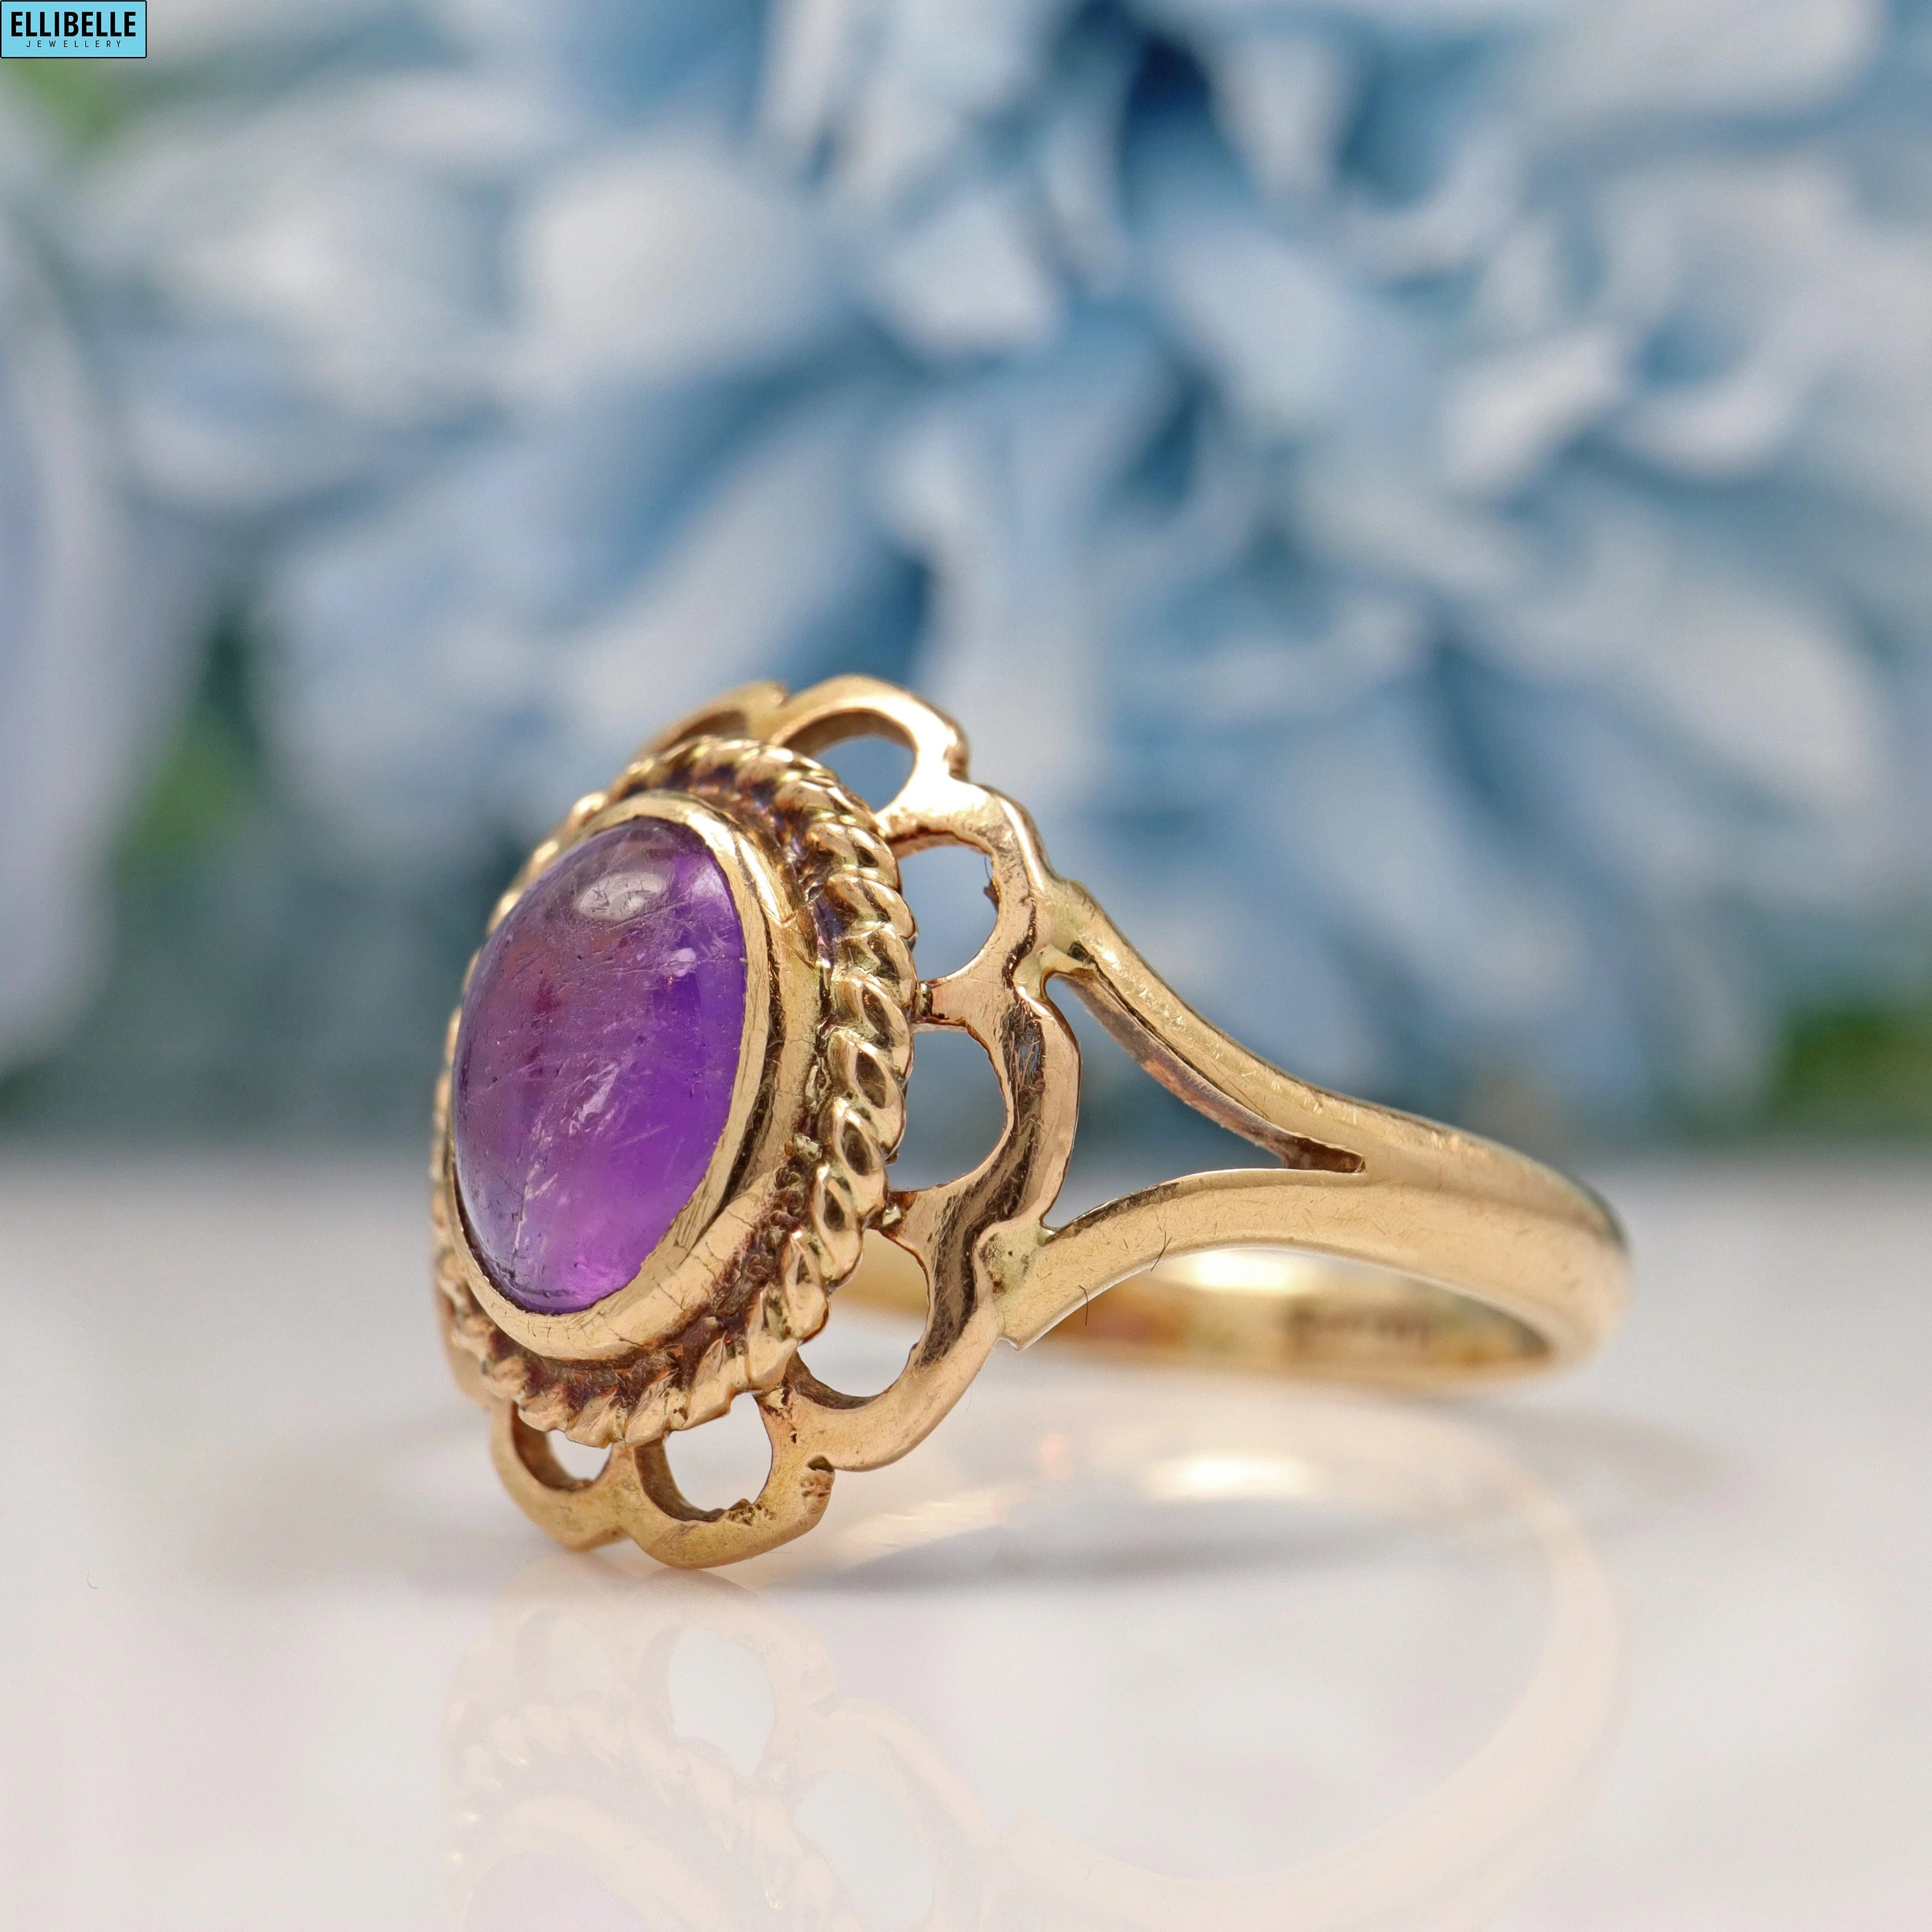 Vintage 1940s 9ct Gold Amethyst Cabochon Ring - London 1948